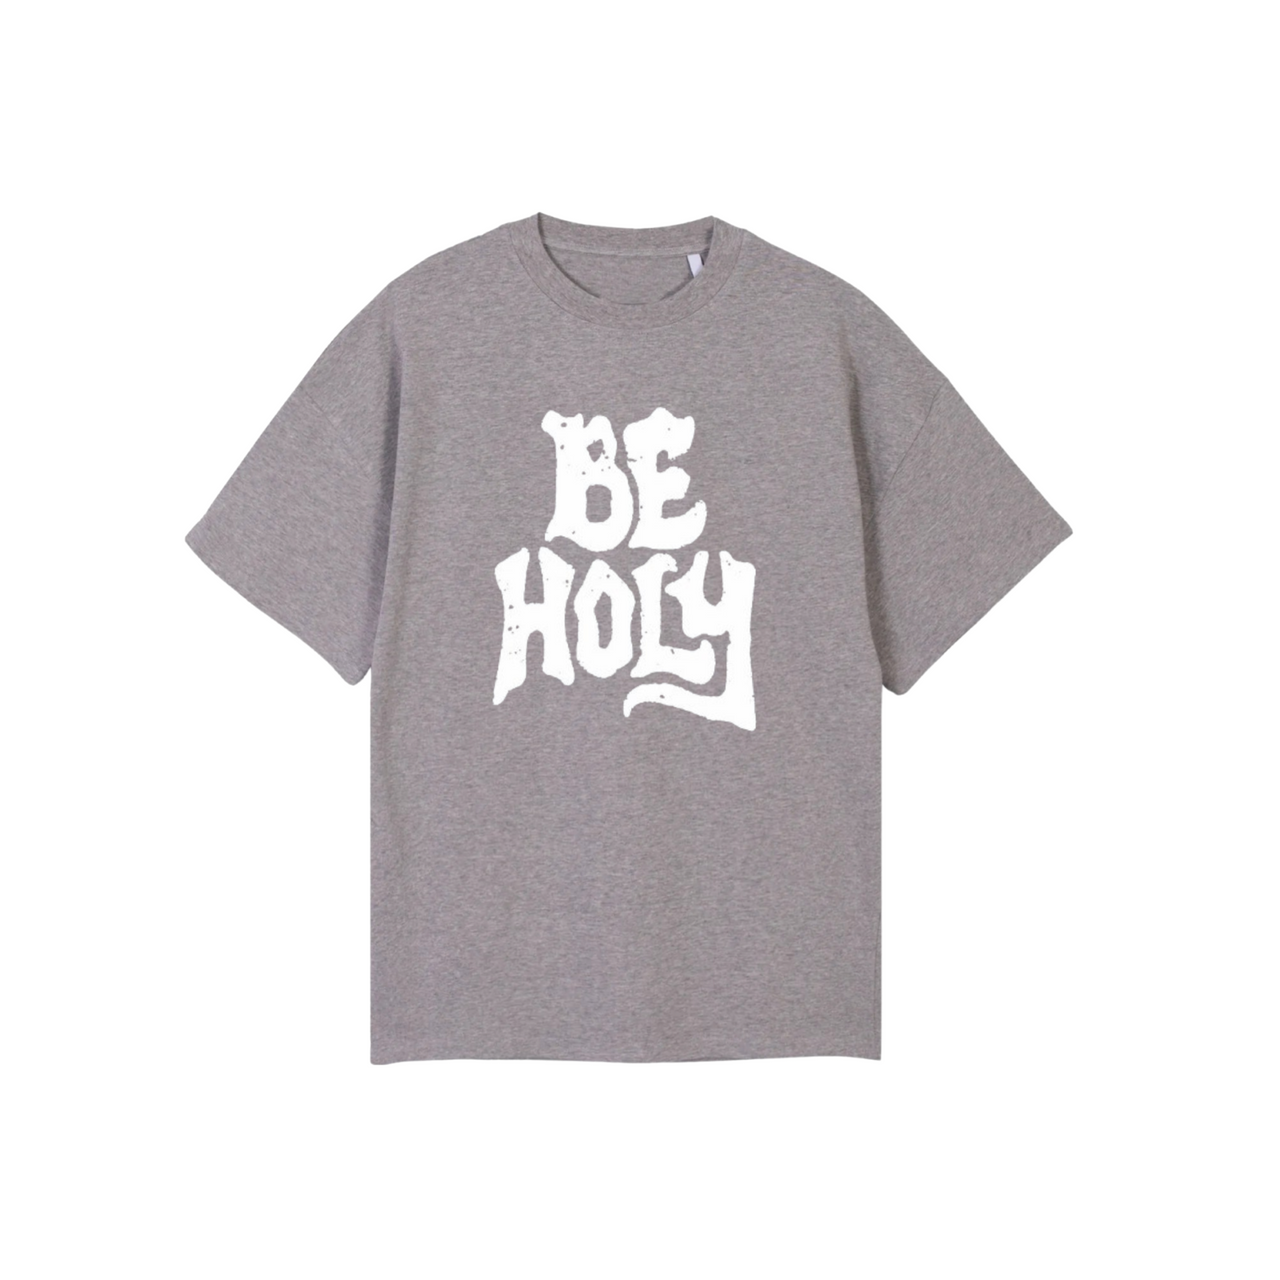 Be Holy As I Am Holy Tee - Pima Cotton (Oversized Fit)